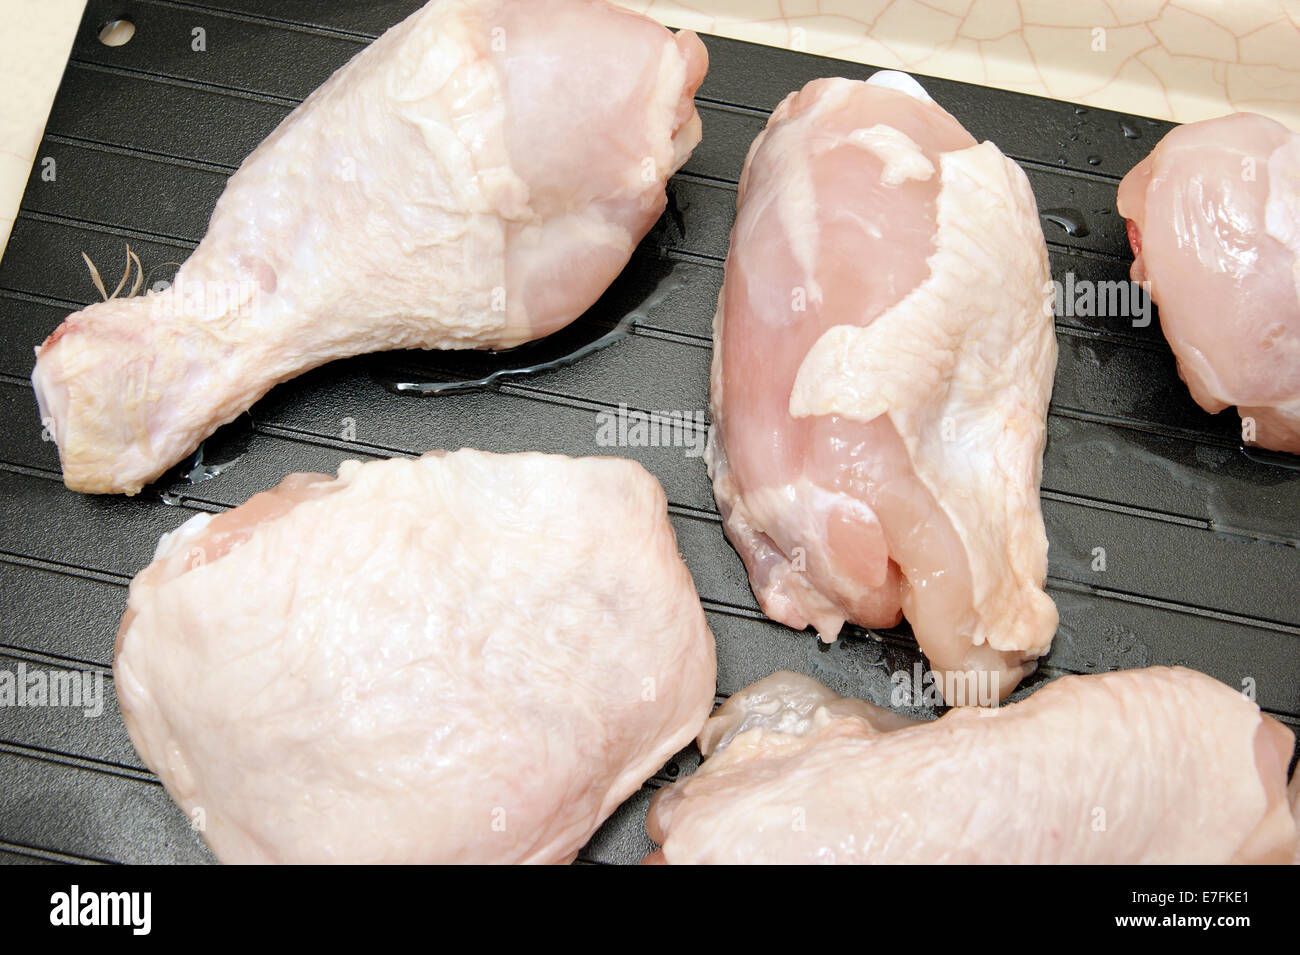 Defrosting chicken legs & thighs on a super defrost tray to speed up the natural process therefore bringing them to room temperature more quickly. Stock Photo